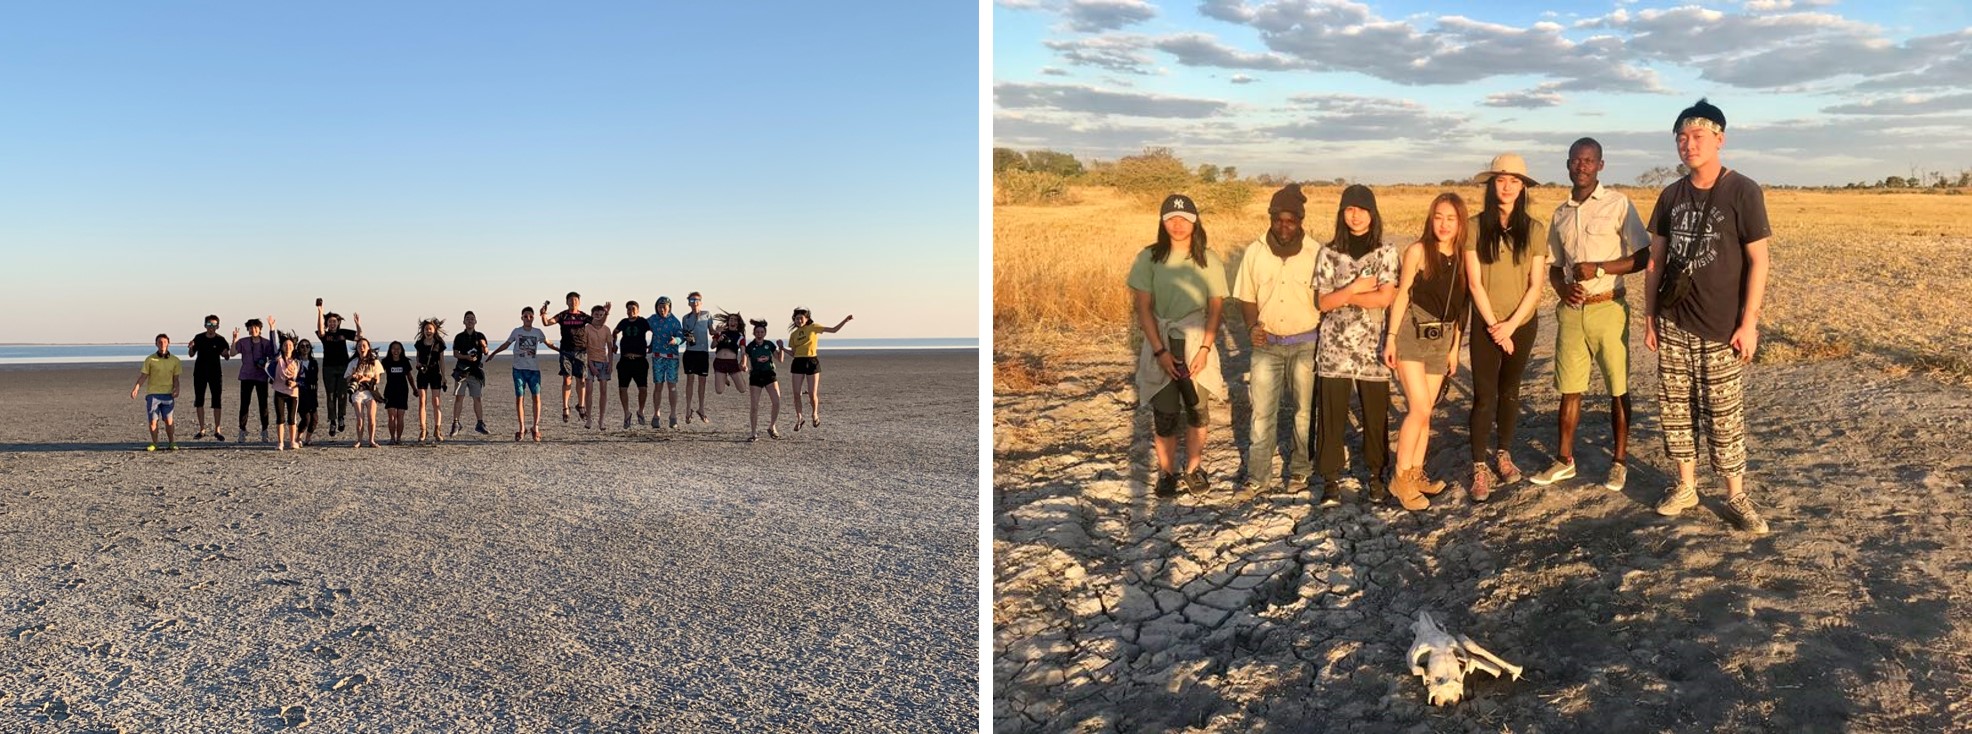 DCB AFRICA TRIP 2019 - wild and animals